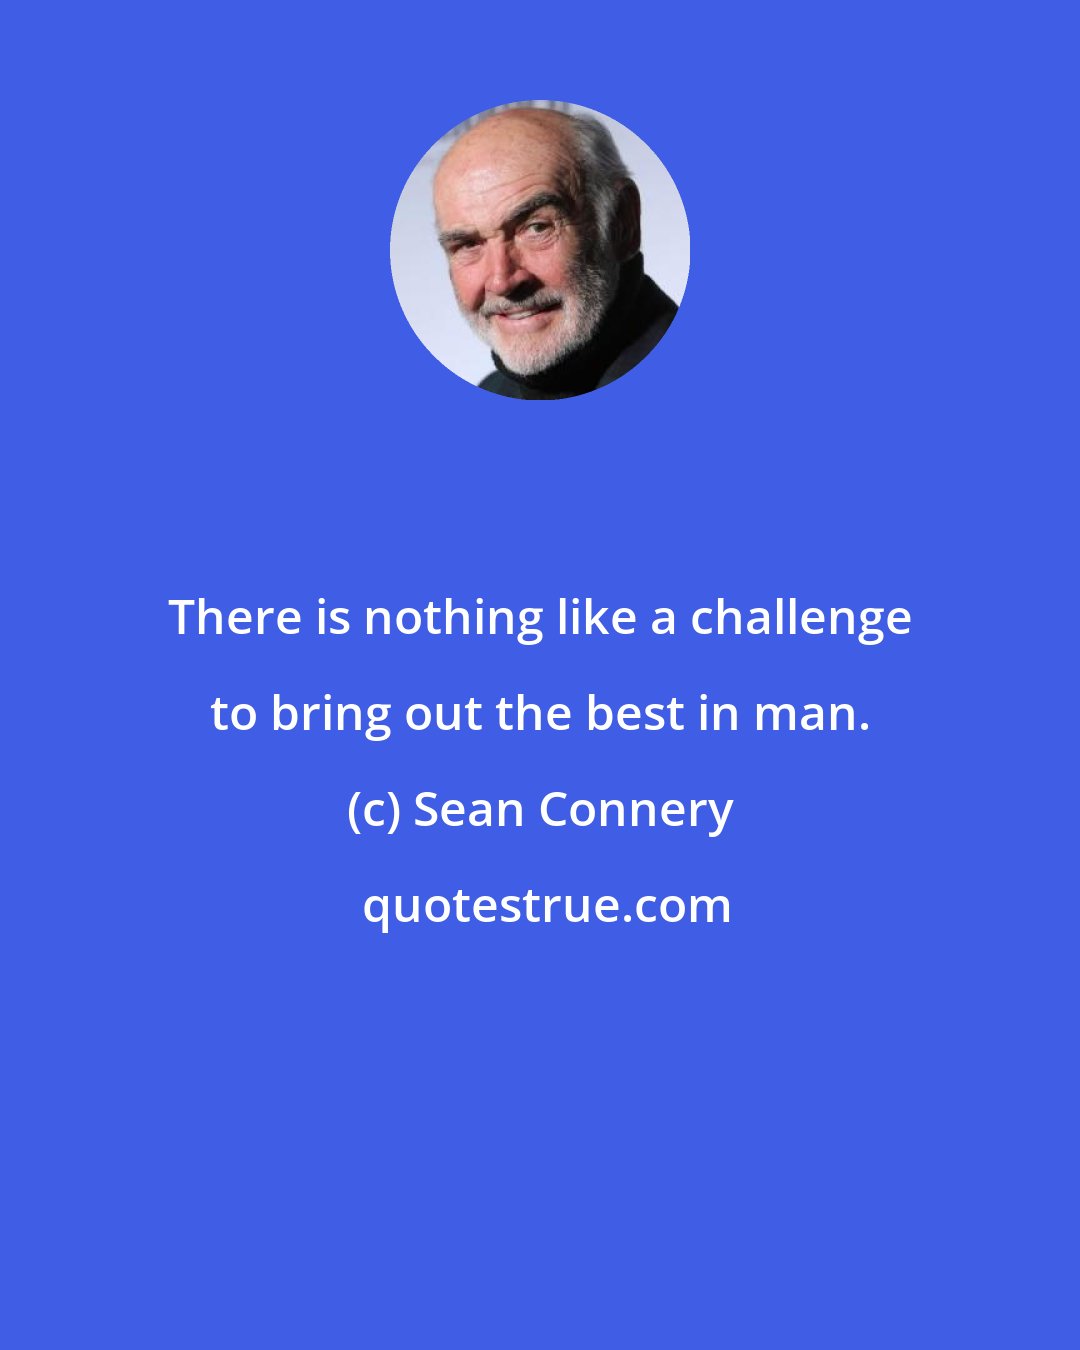 Sean Connery: There is nothing like a challenge to bring out the best in man.